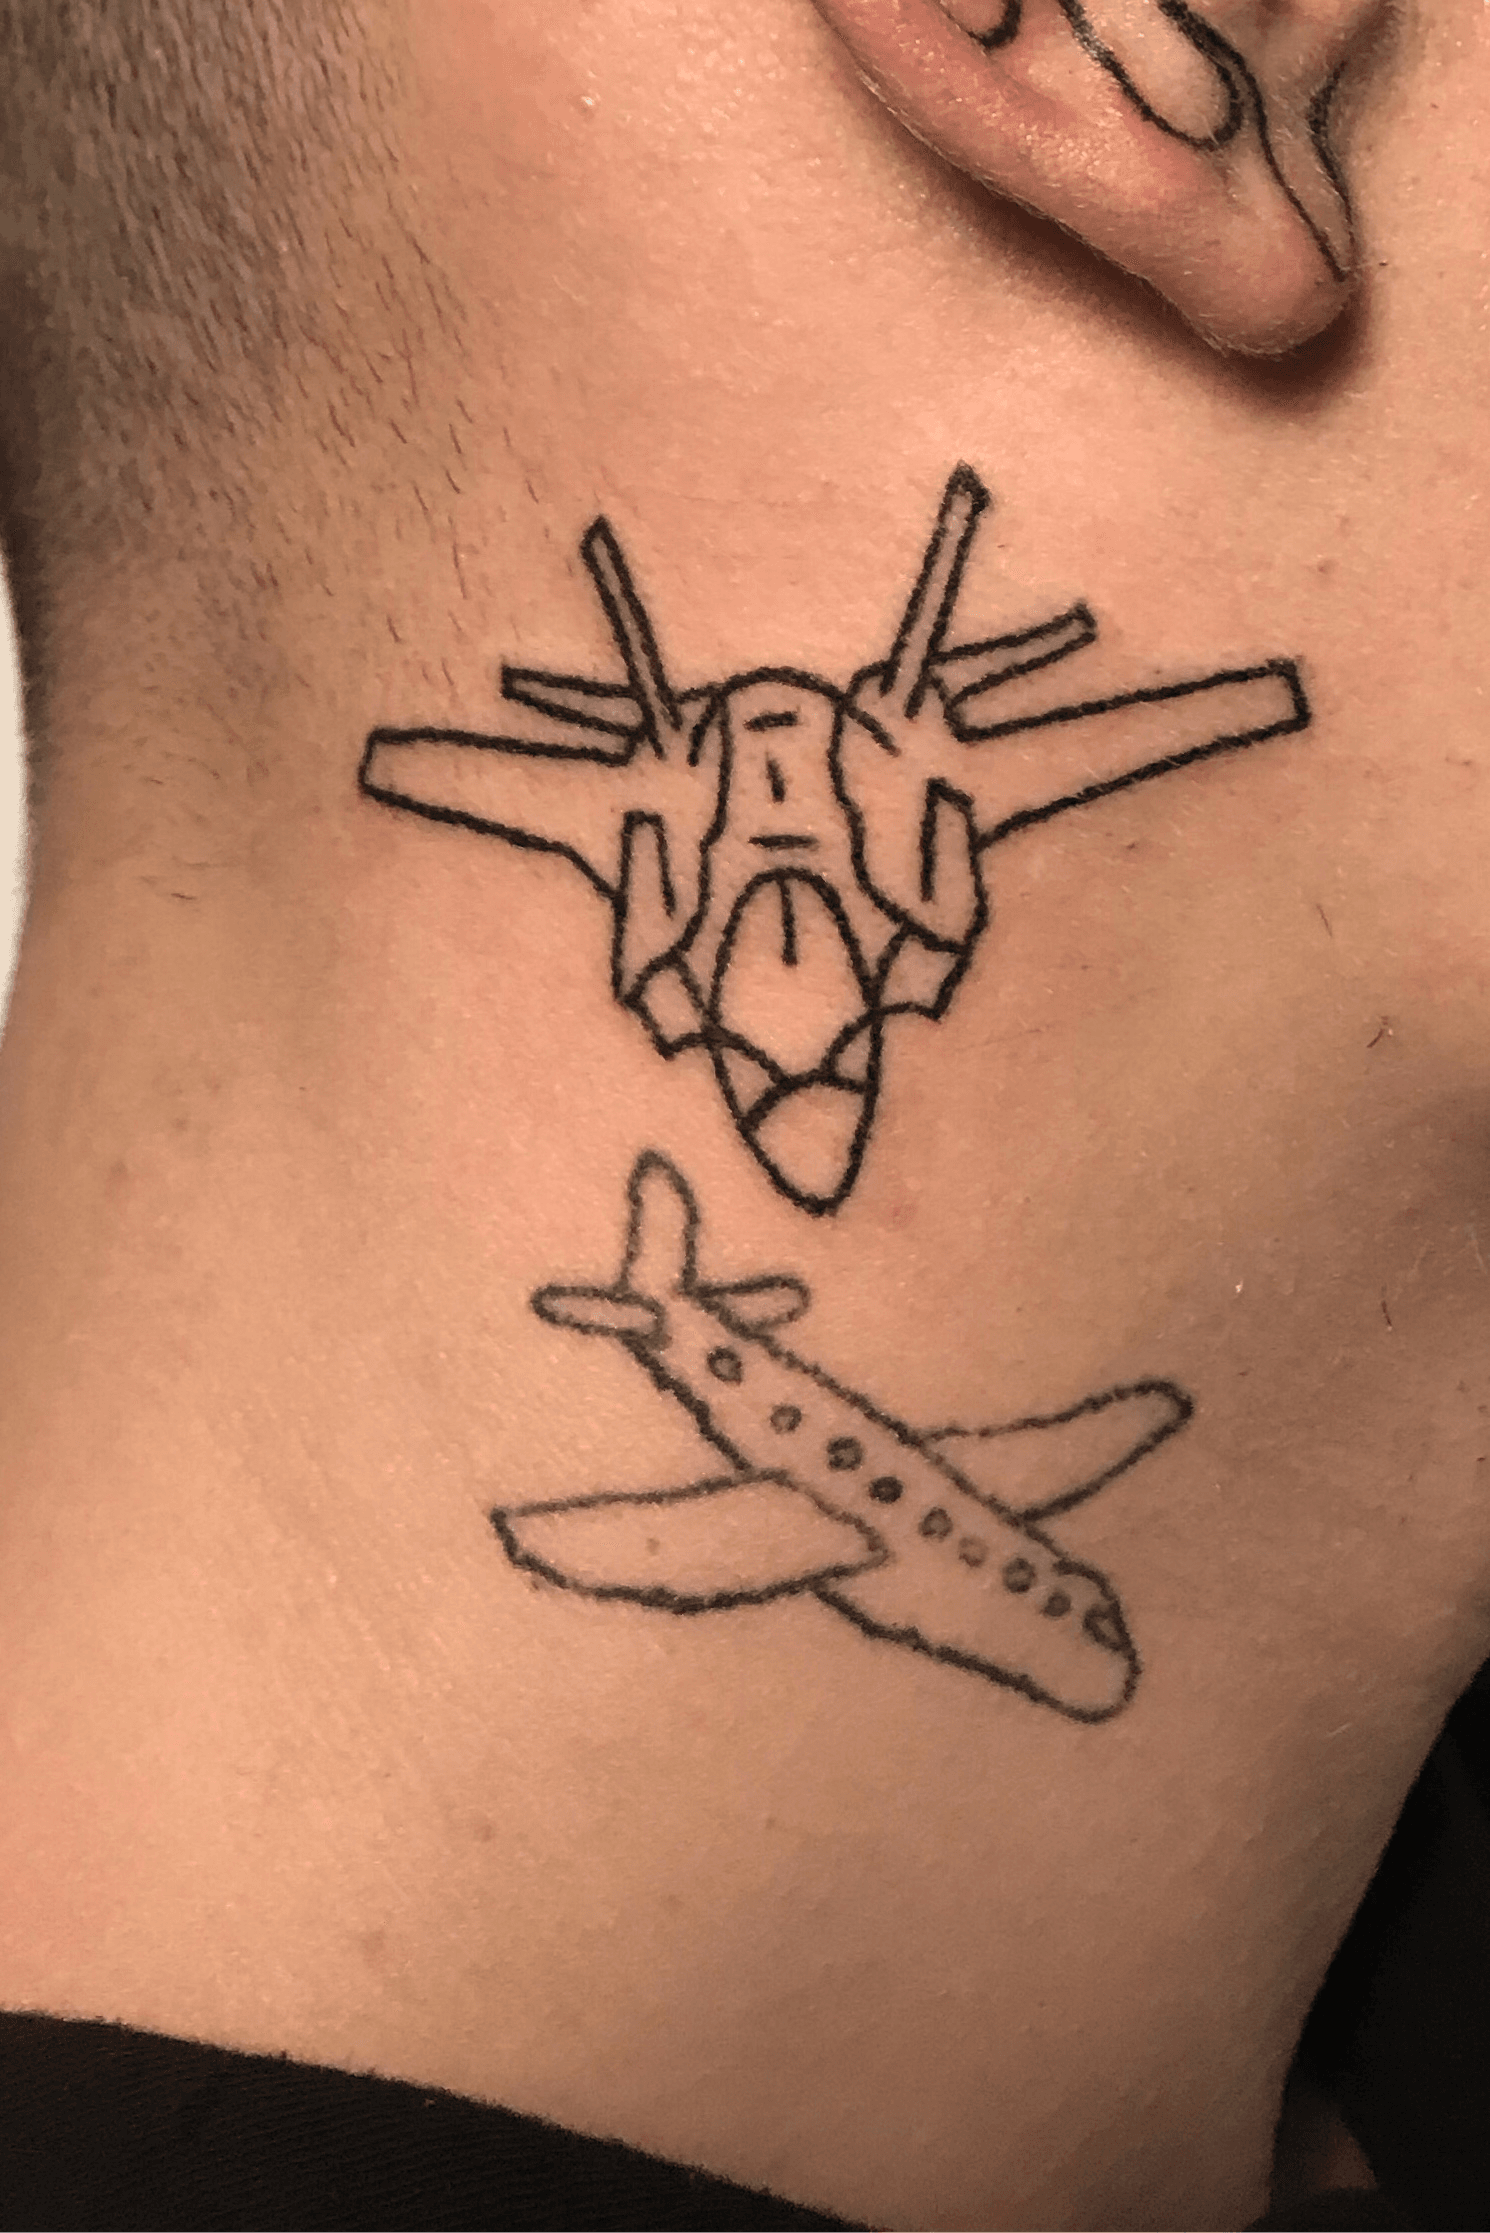 Top 63 Air Force Tattoo Ideas 2021 Inspiration Guide